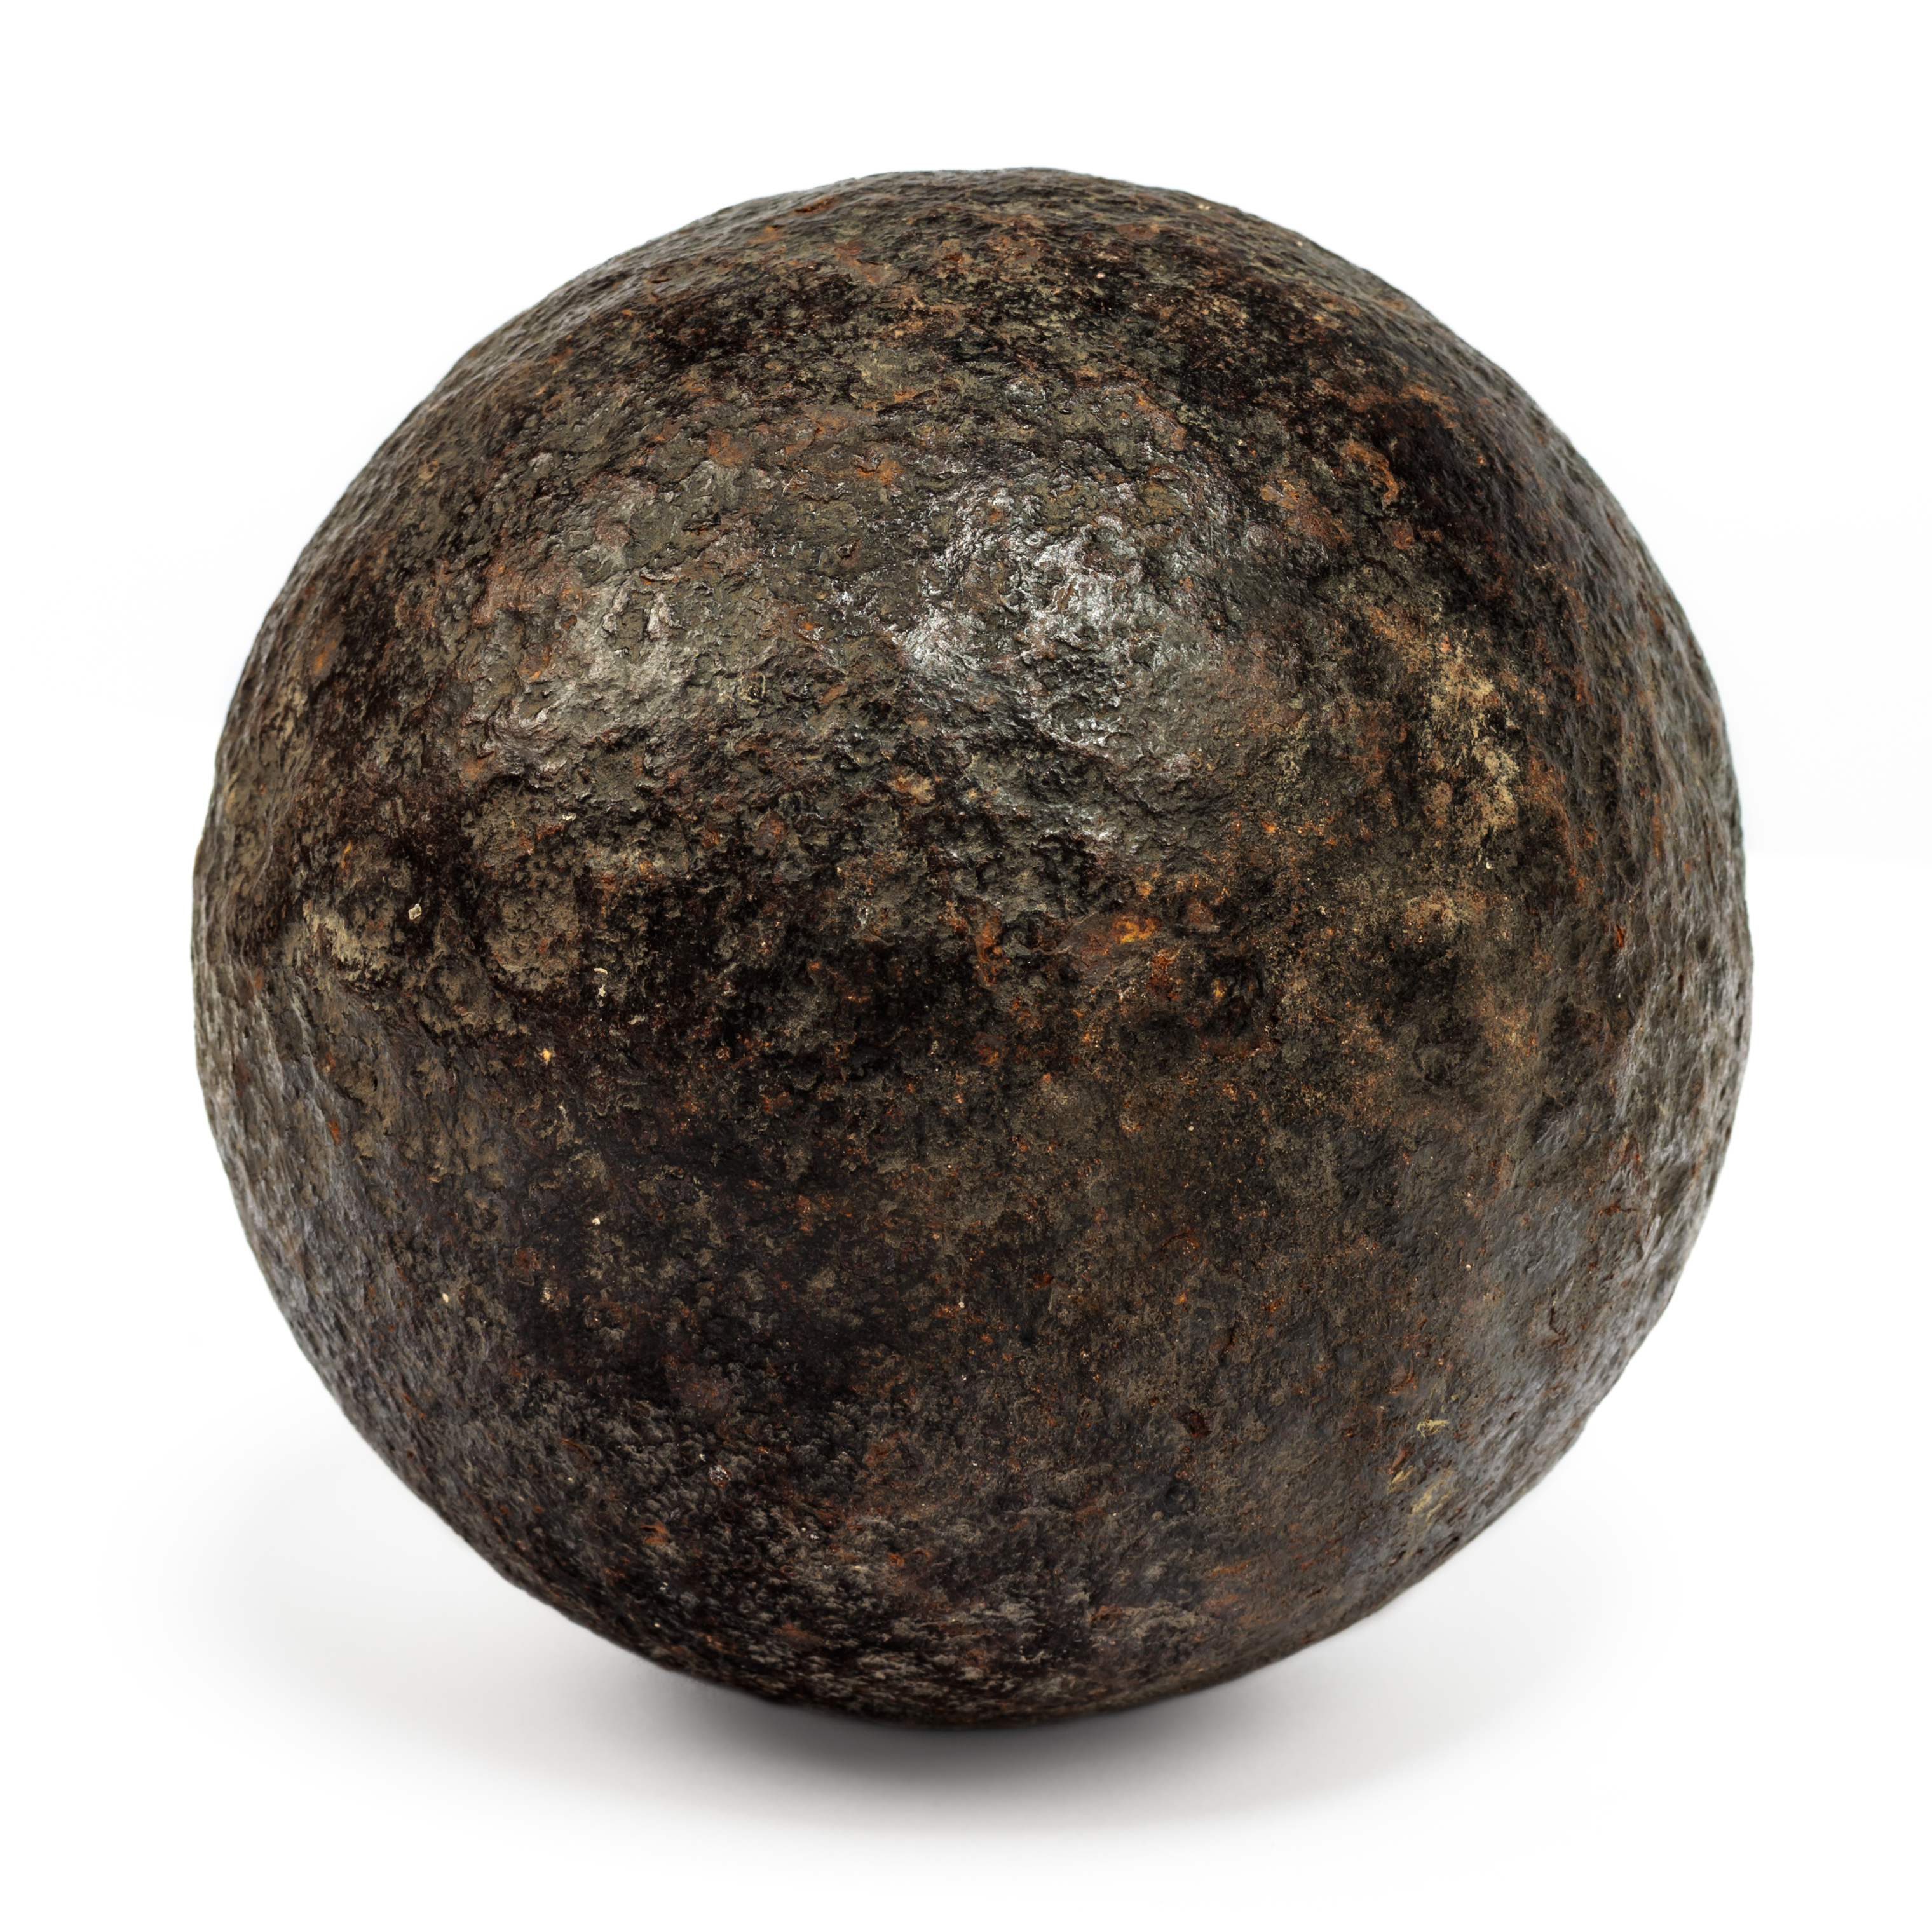 The cannonball, like this one, was dislodged from a tree in Kansas City